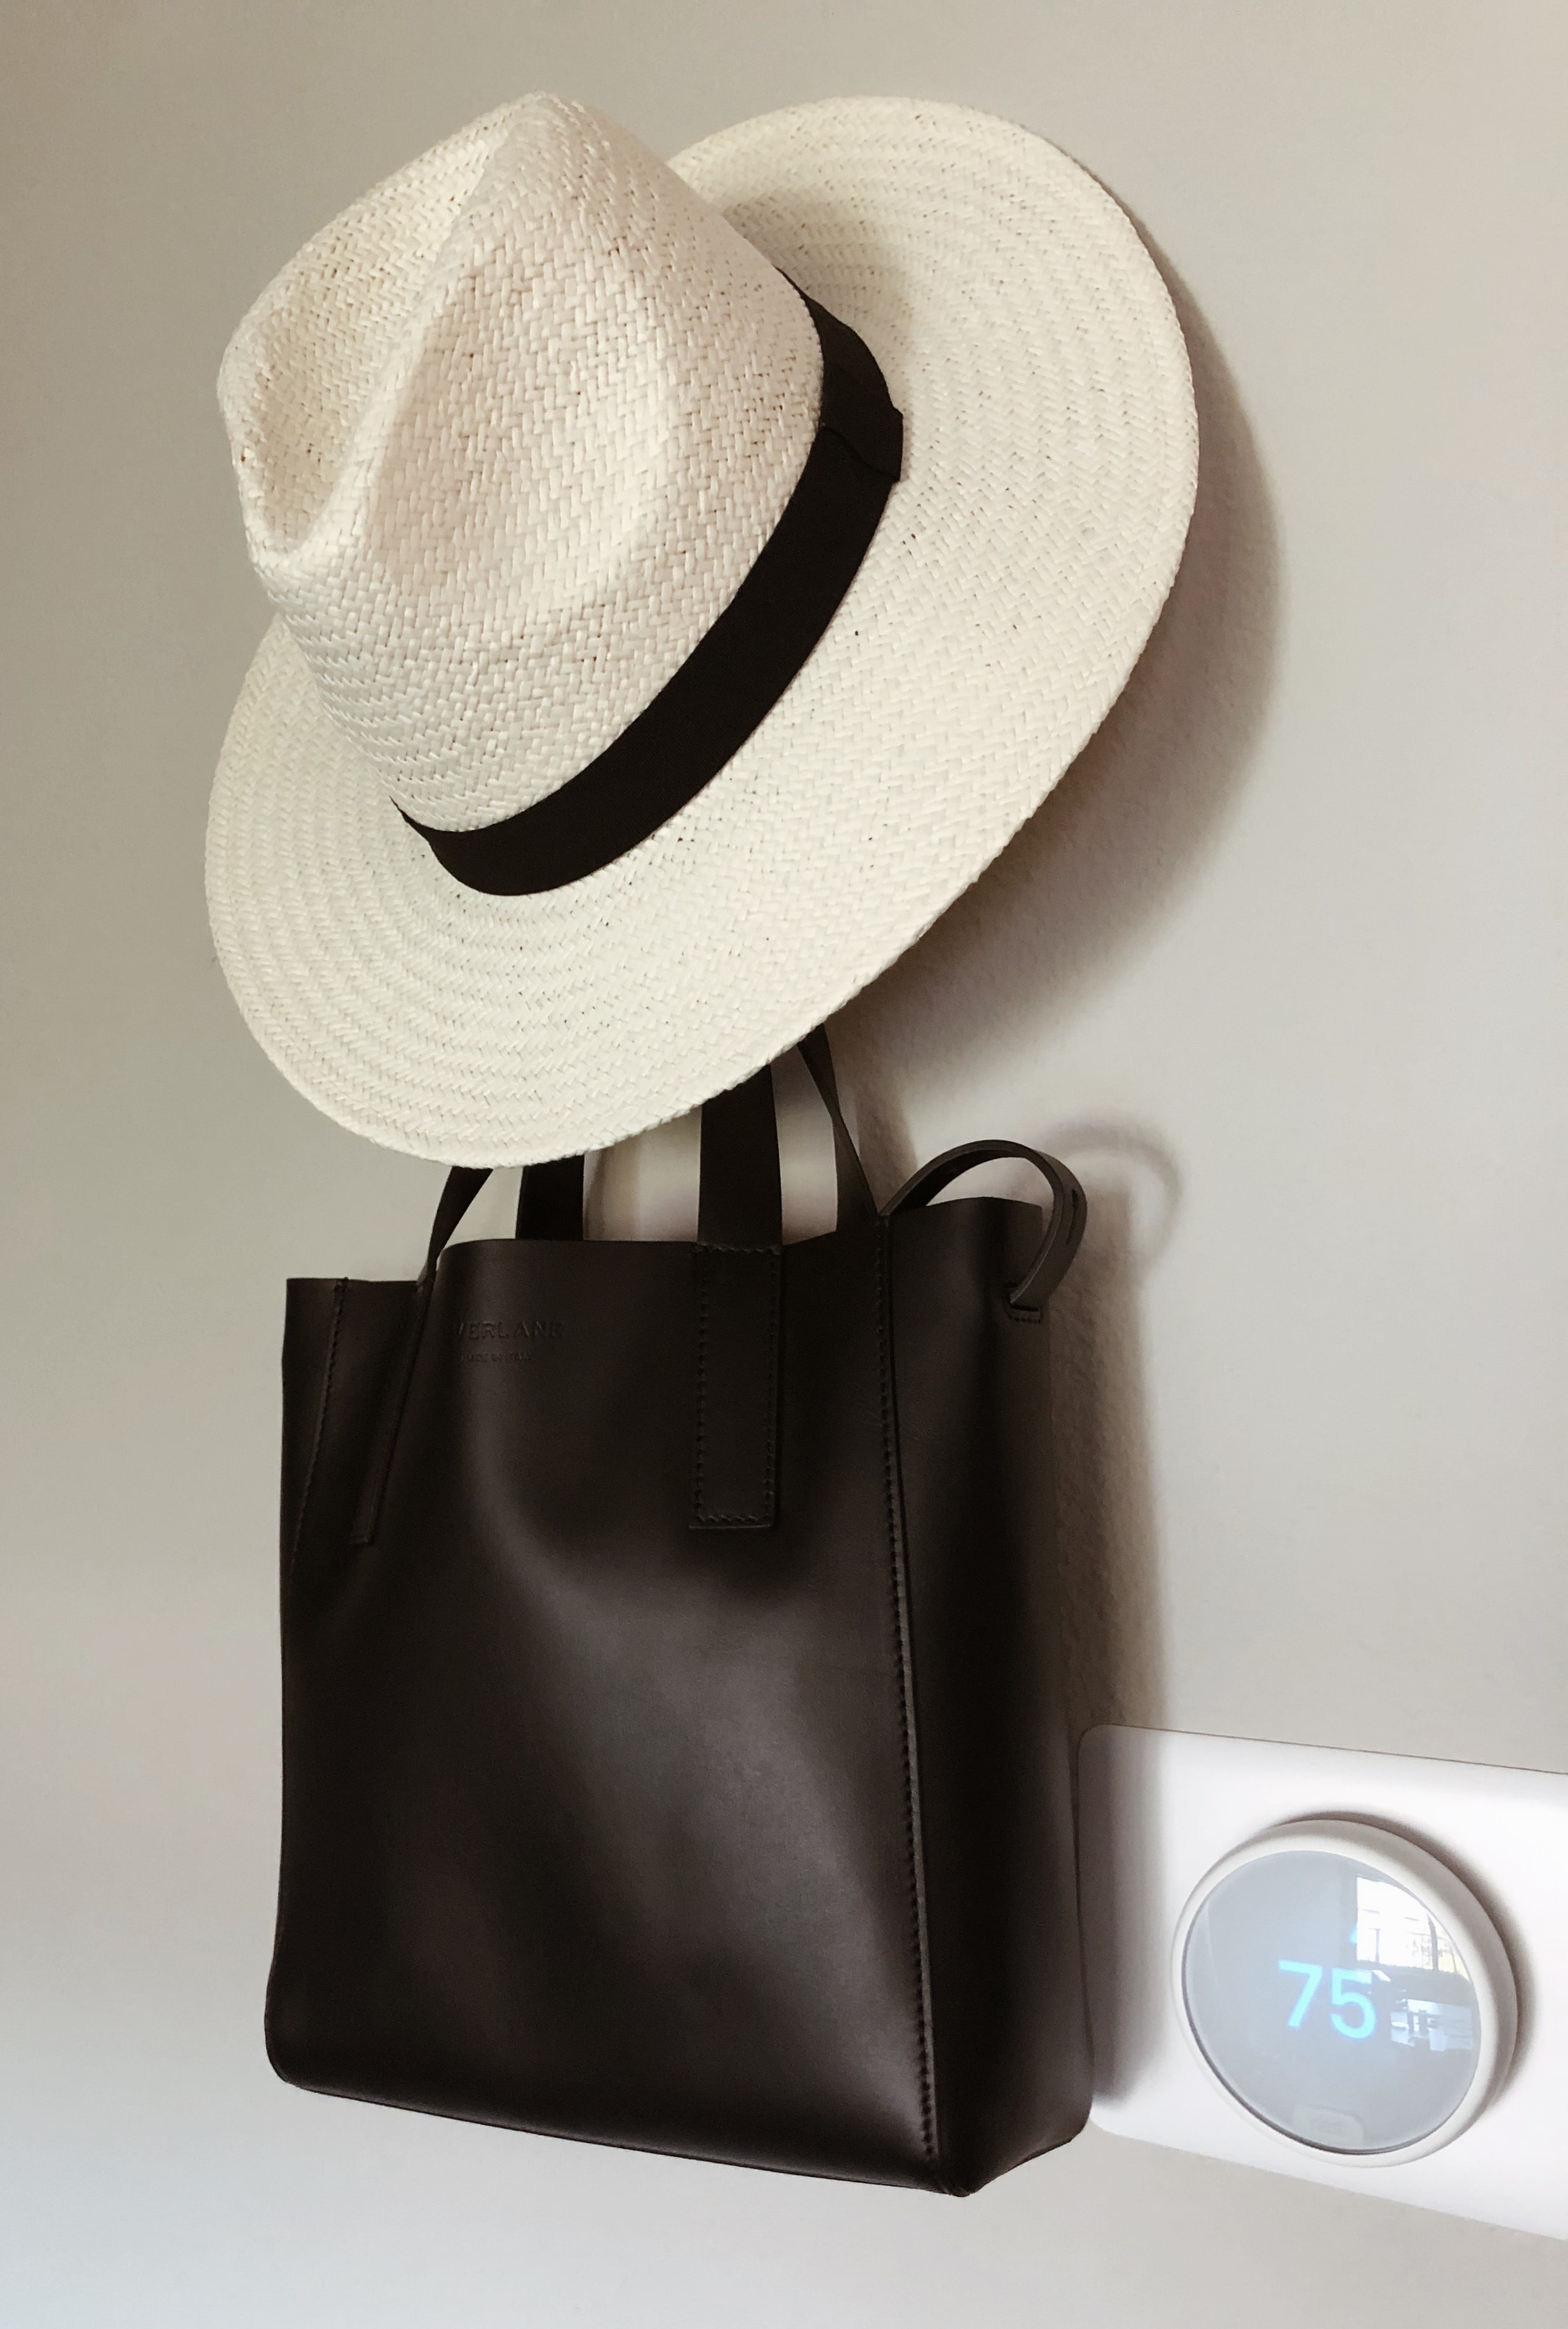 Everlane Review: The Day Tote Mini — Fairly Curated